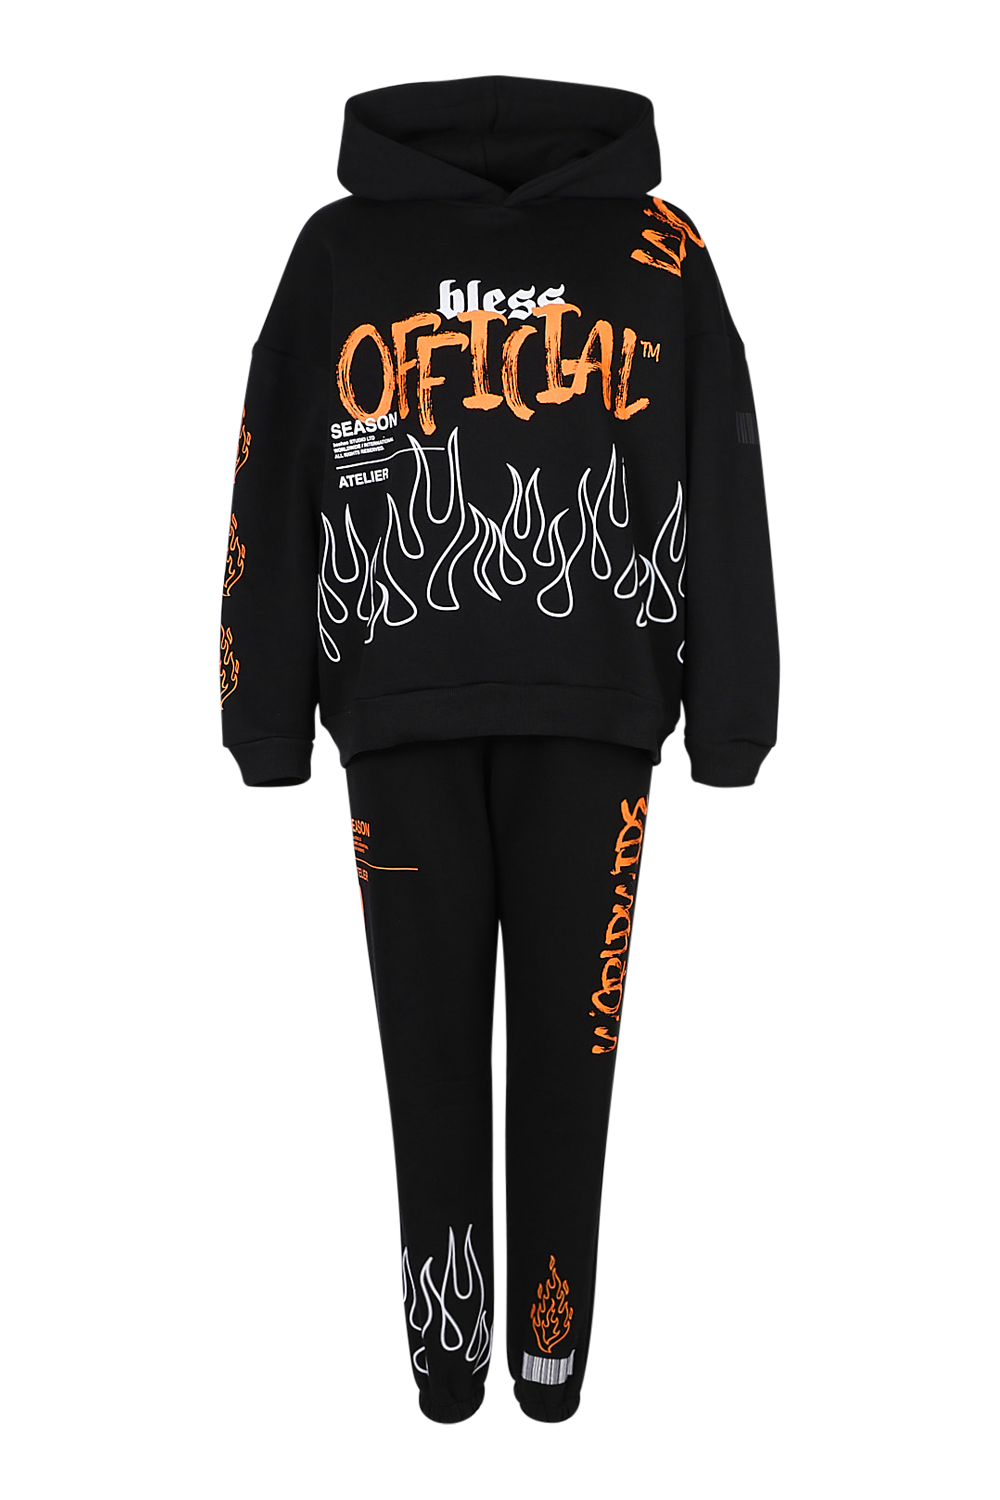 Official Graffiti Hooded Tracksuit